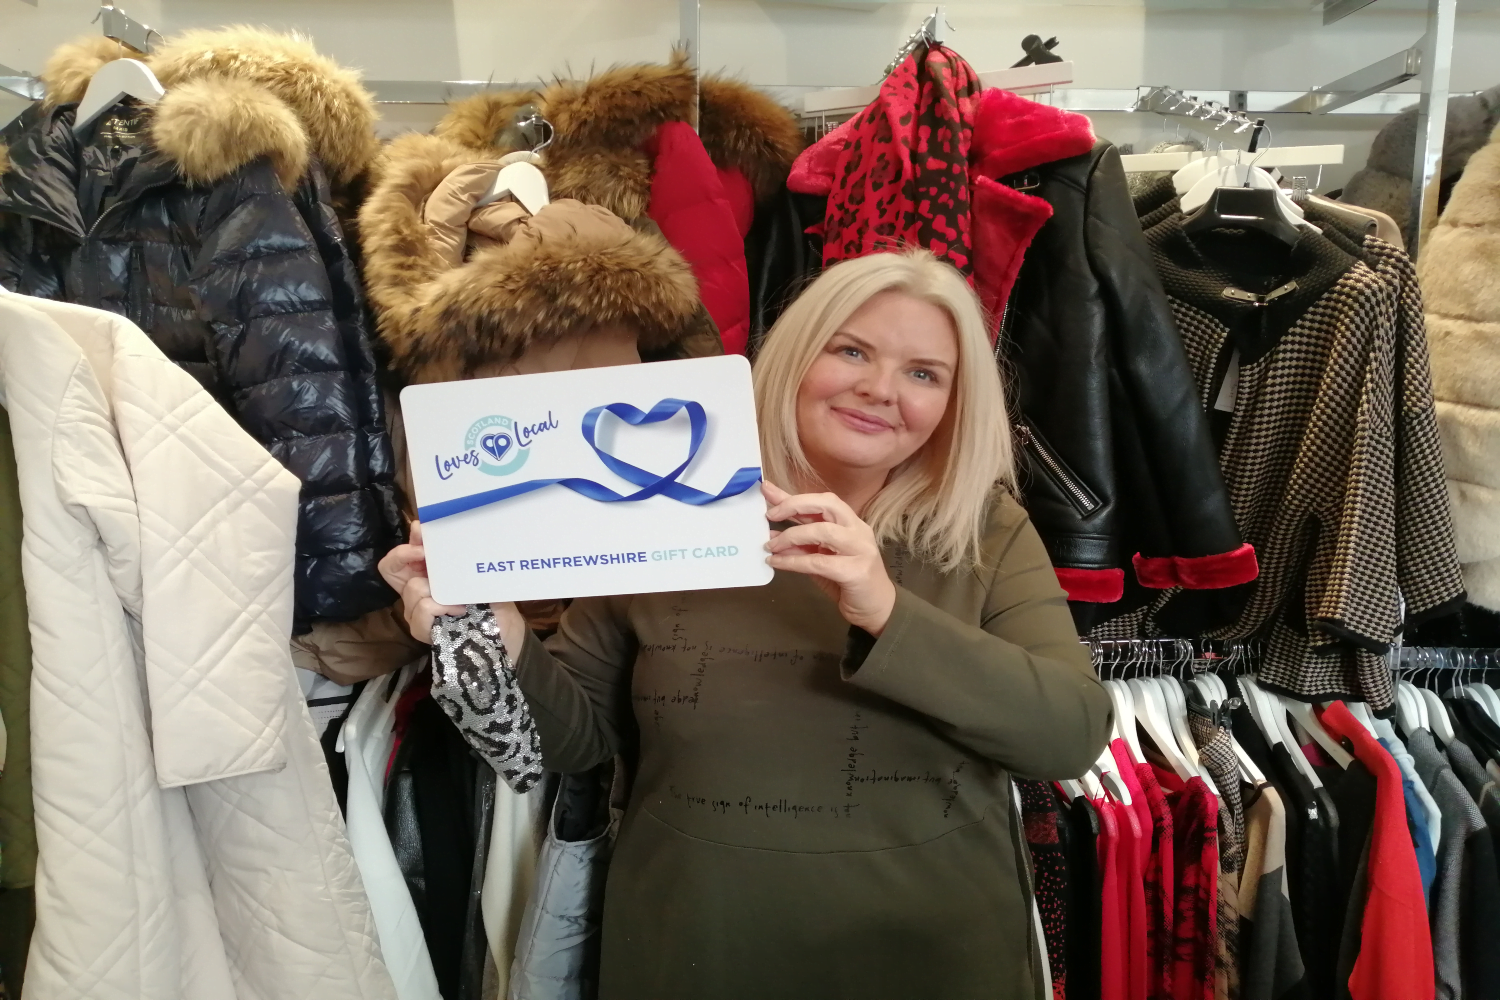 The East Renfrewshire Gift Card: Kate’s Boutique